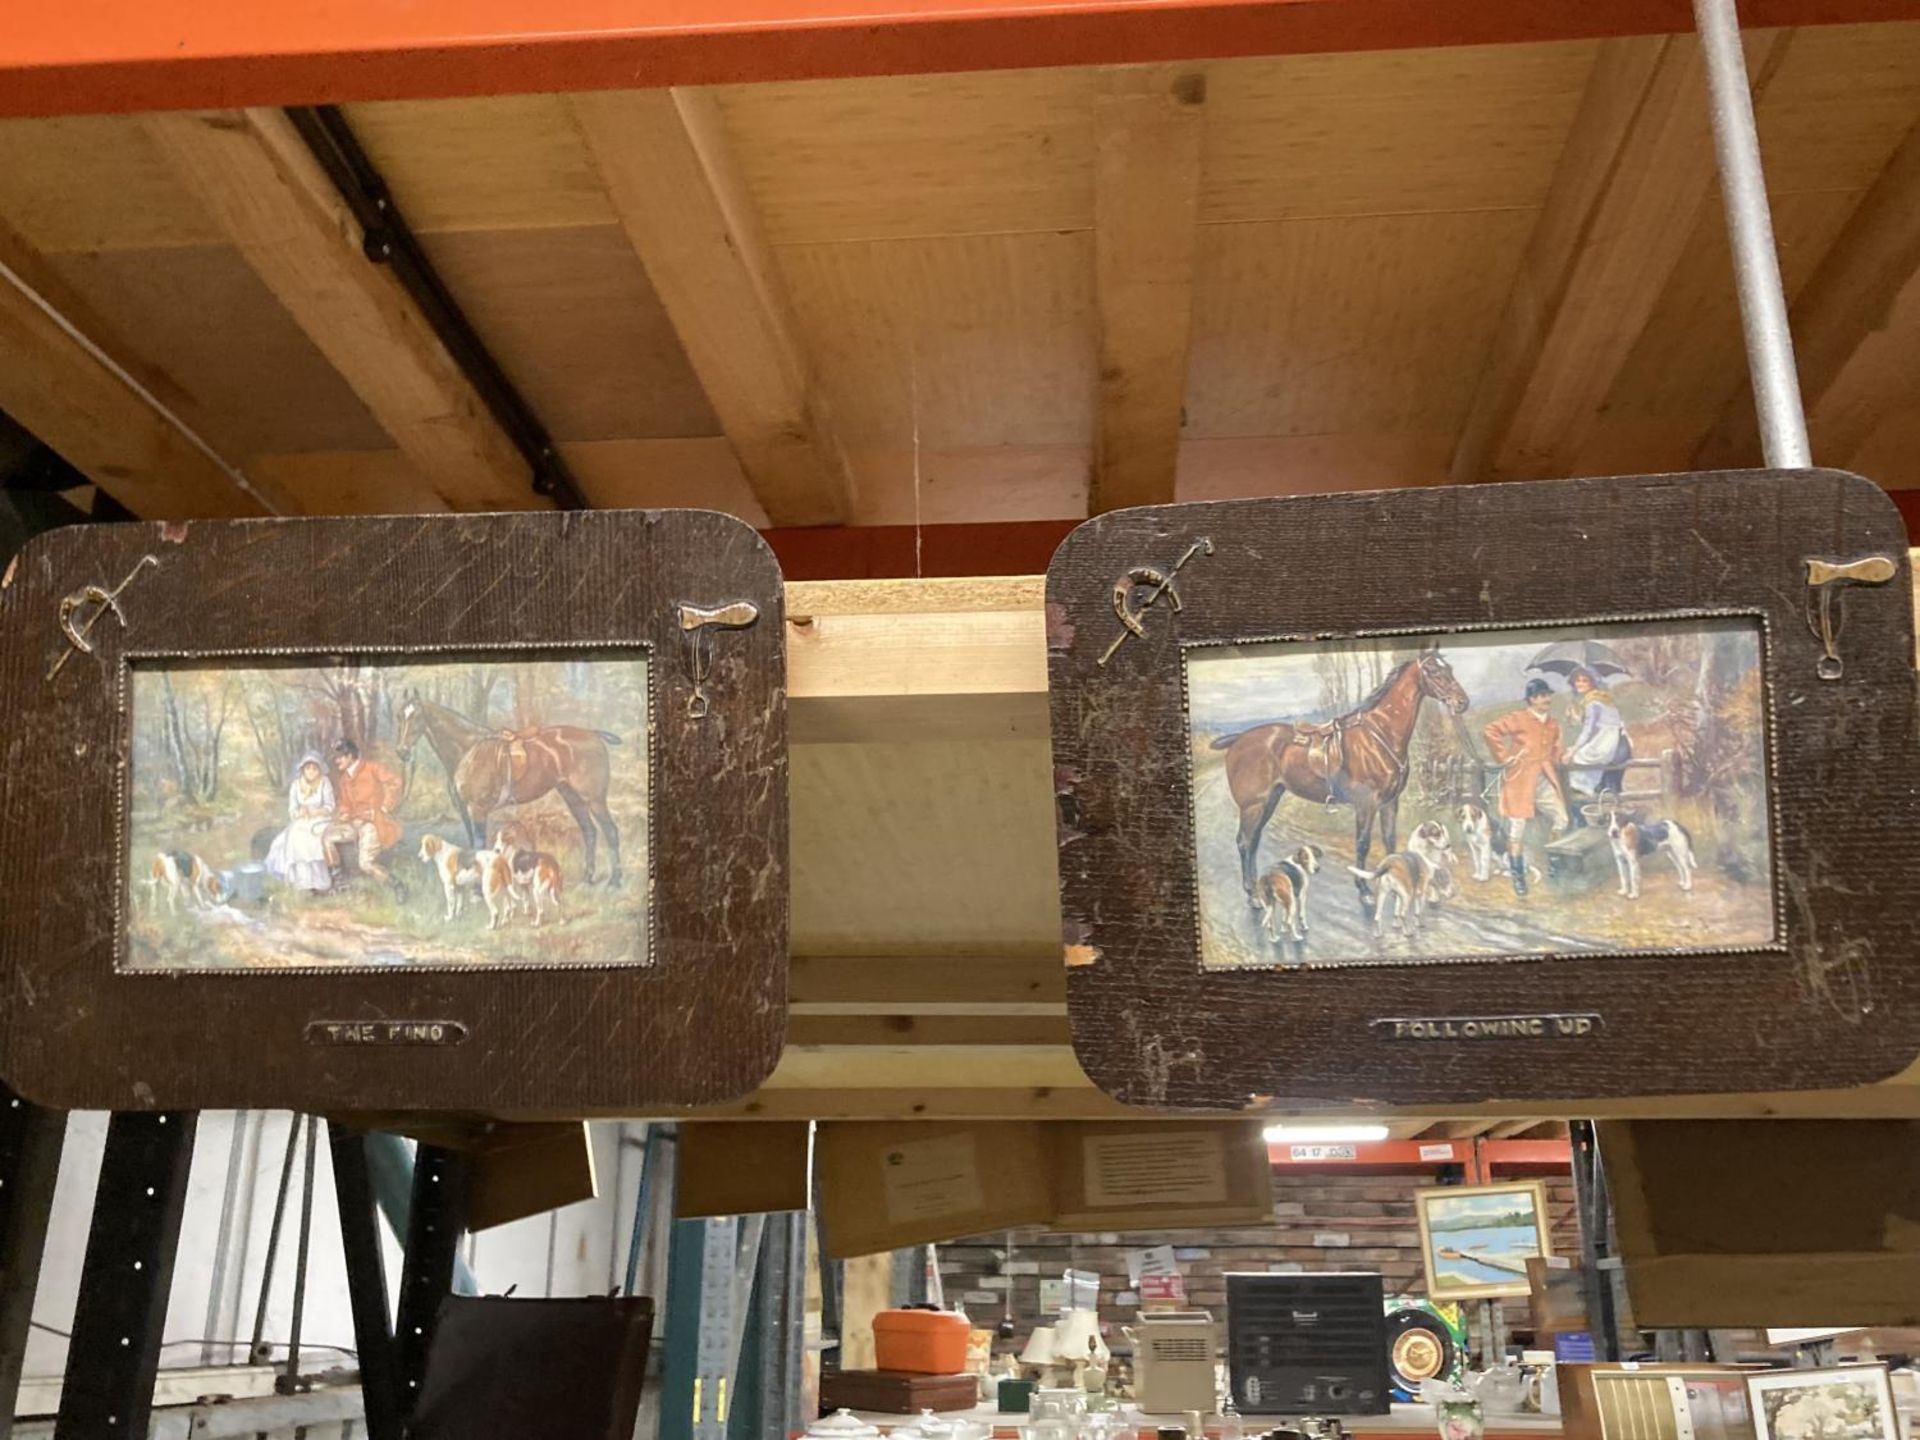 FOUR HUNTING SCENE PRINTS IN WOODEN FRAMES TO INCLUDE "THE FIND," "FOLLOWING UP," "THE FINISH" - Image 2 of 7